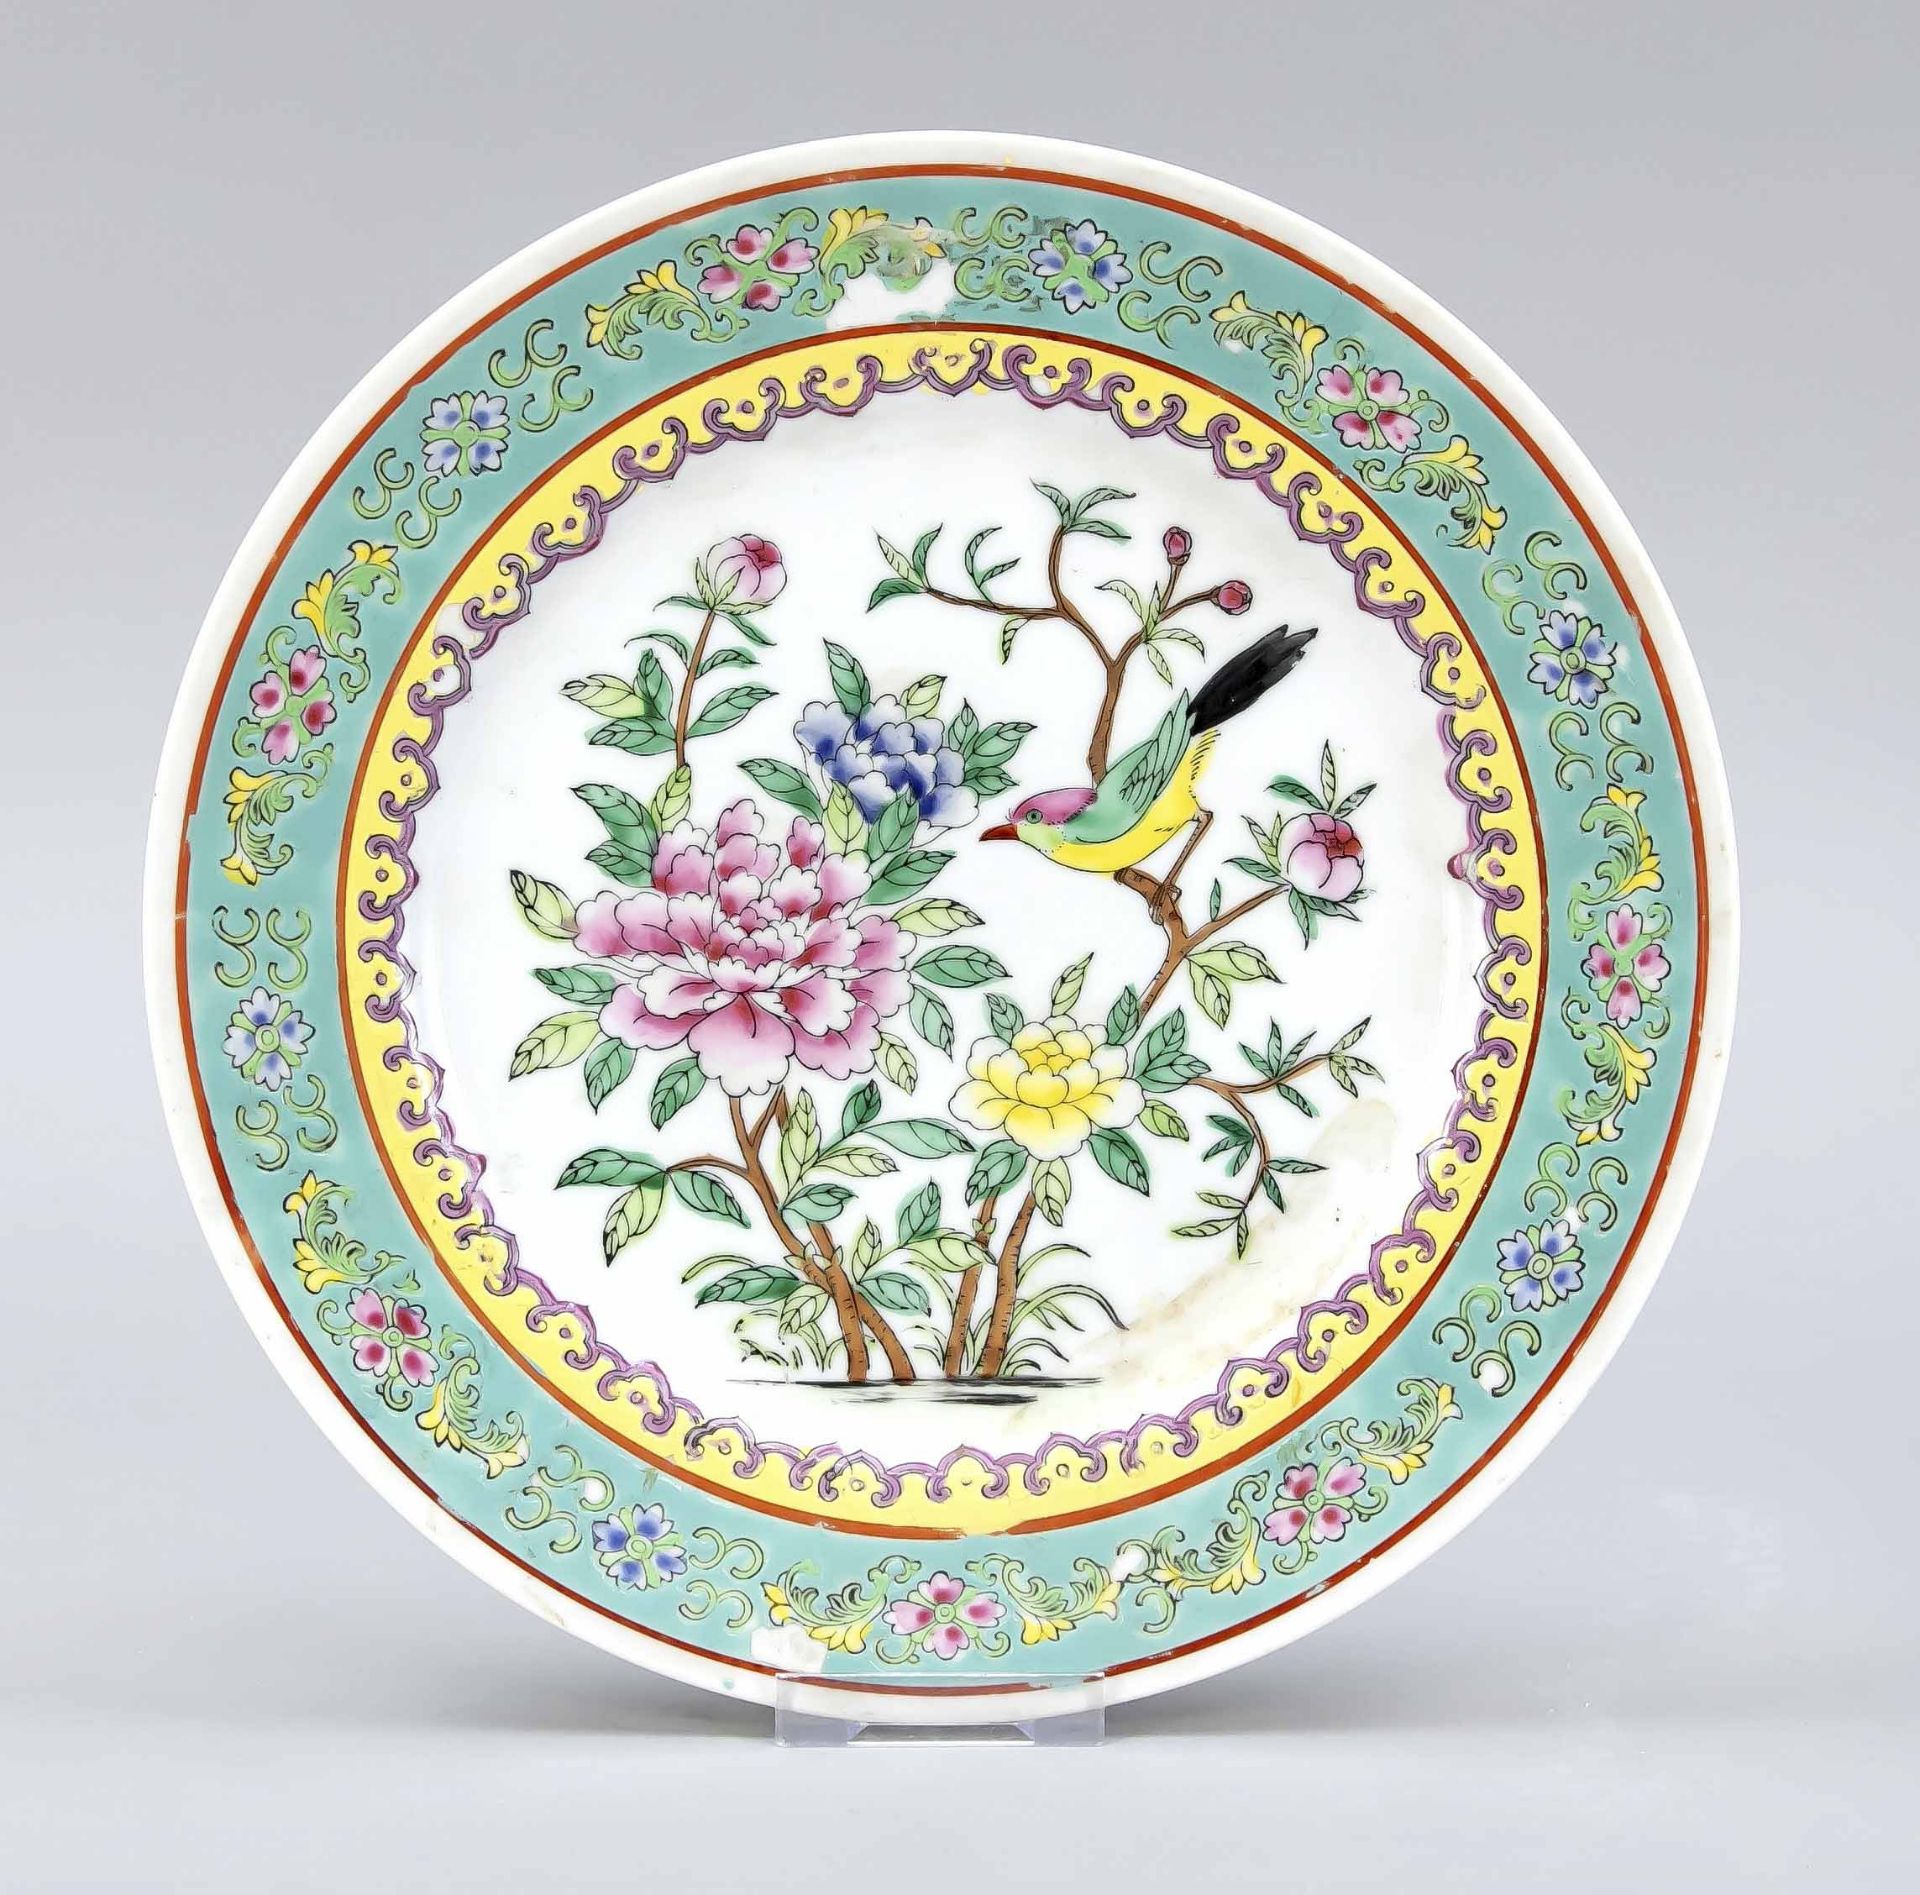 Famille rose plate, China, 20th c. In the mirror a bird in flowering branches, flag with lotus